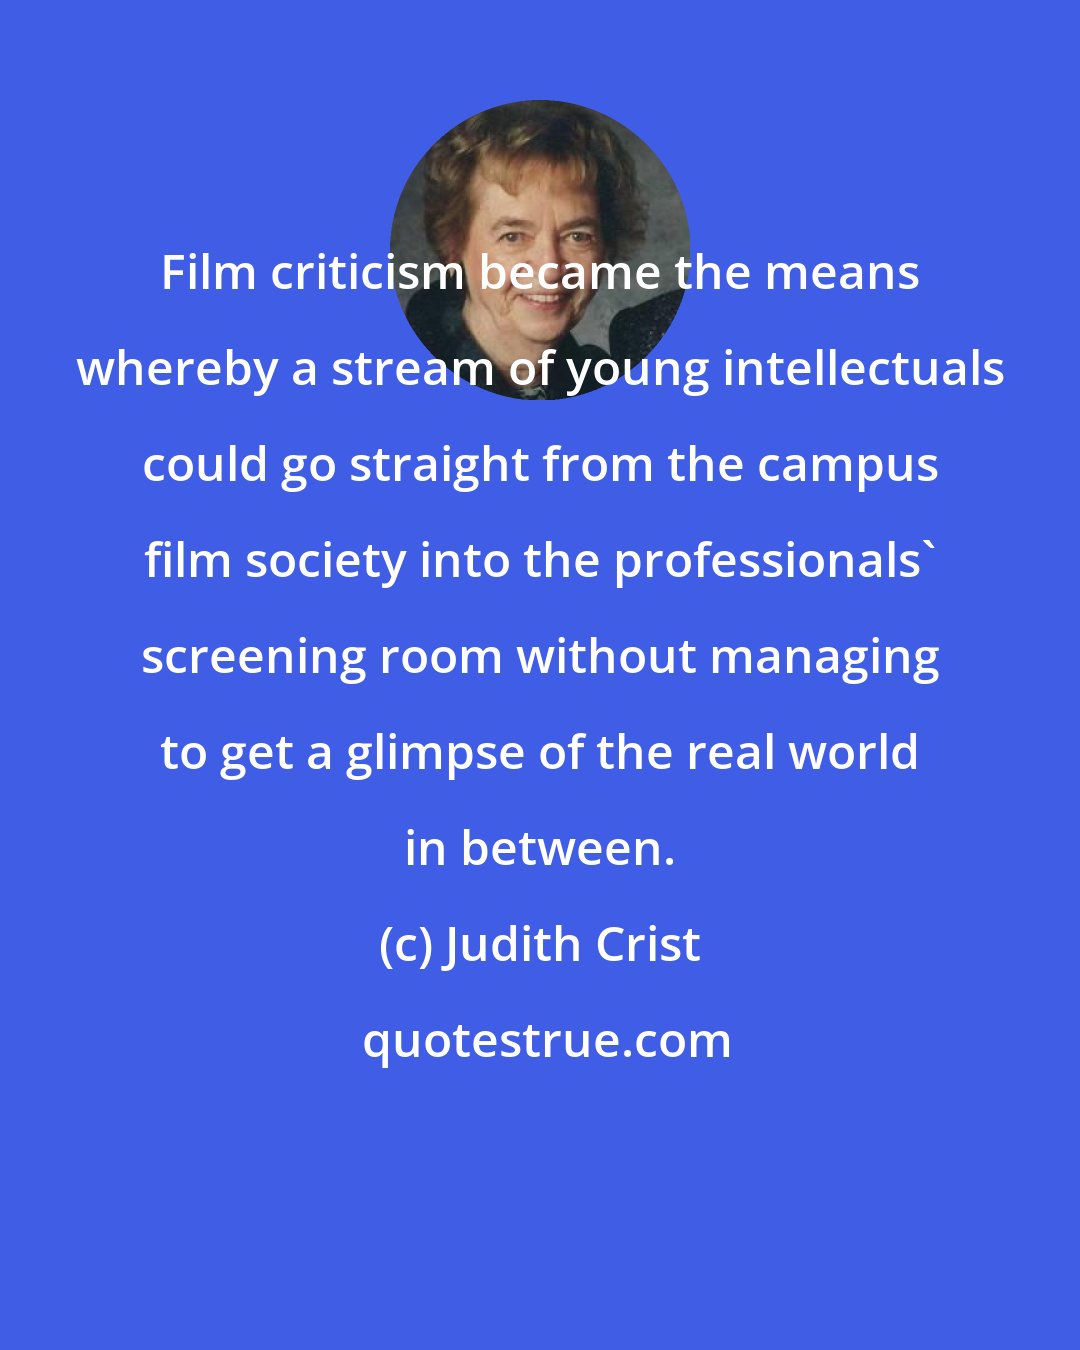 Judith Crist: Film criticism became the means whereby a stream of young intellectuals could go straight from the campus film society into the professionals' screening room without managing to get a glimpse of the real world in between.